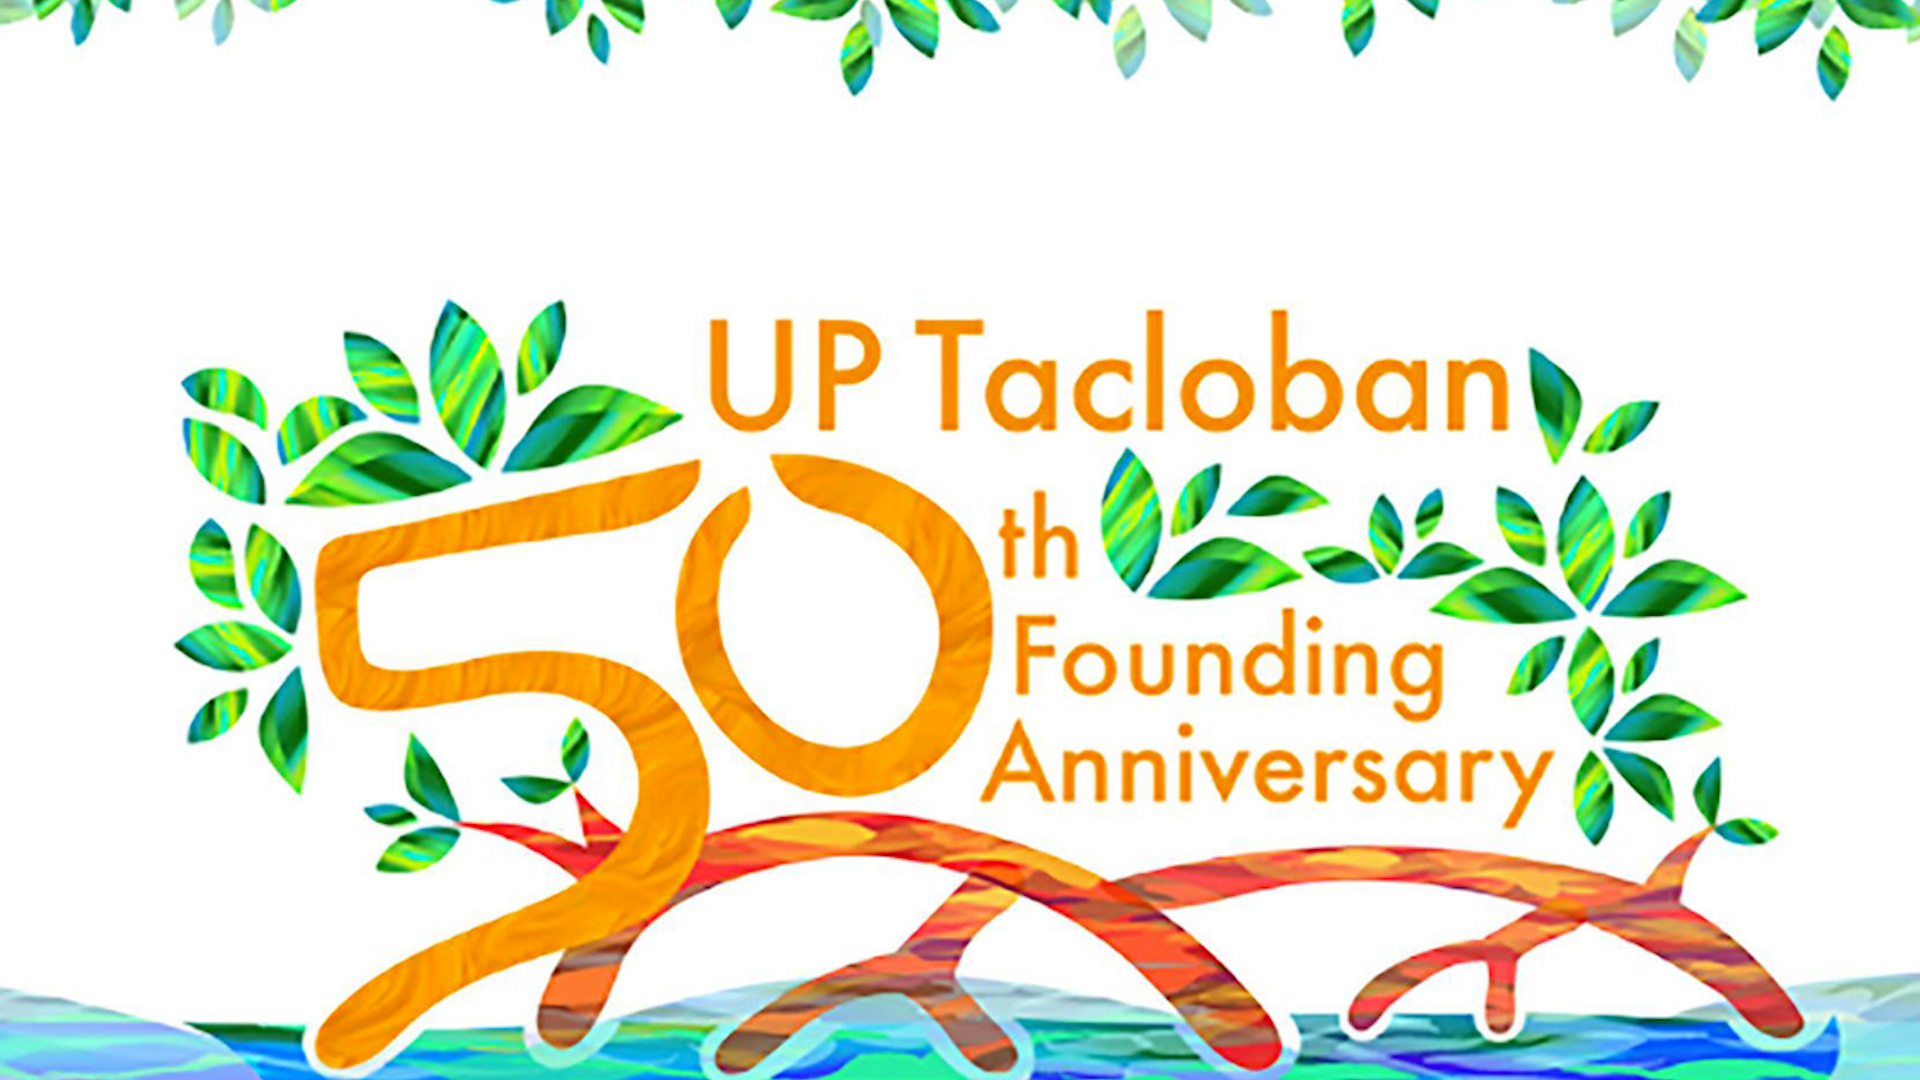 UP Tacloban’s 50th Founding Anniversary